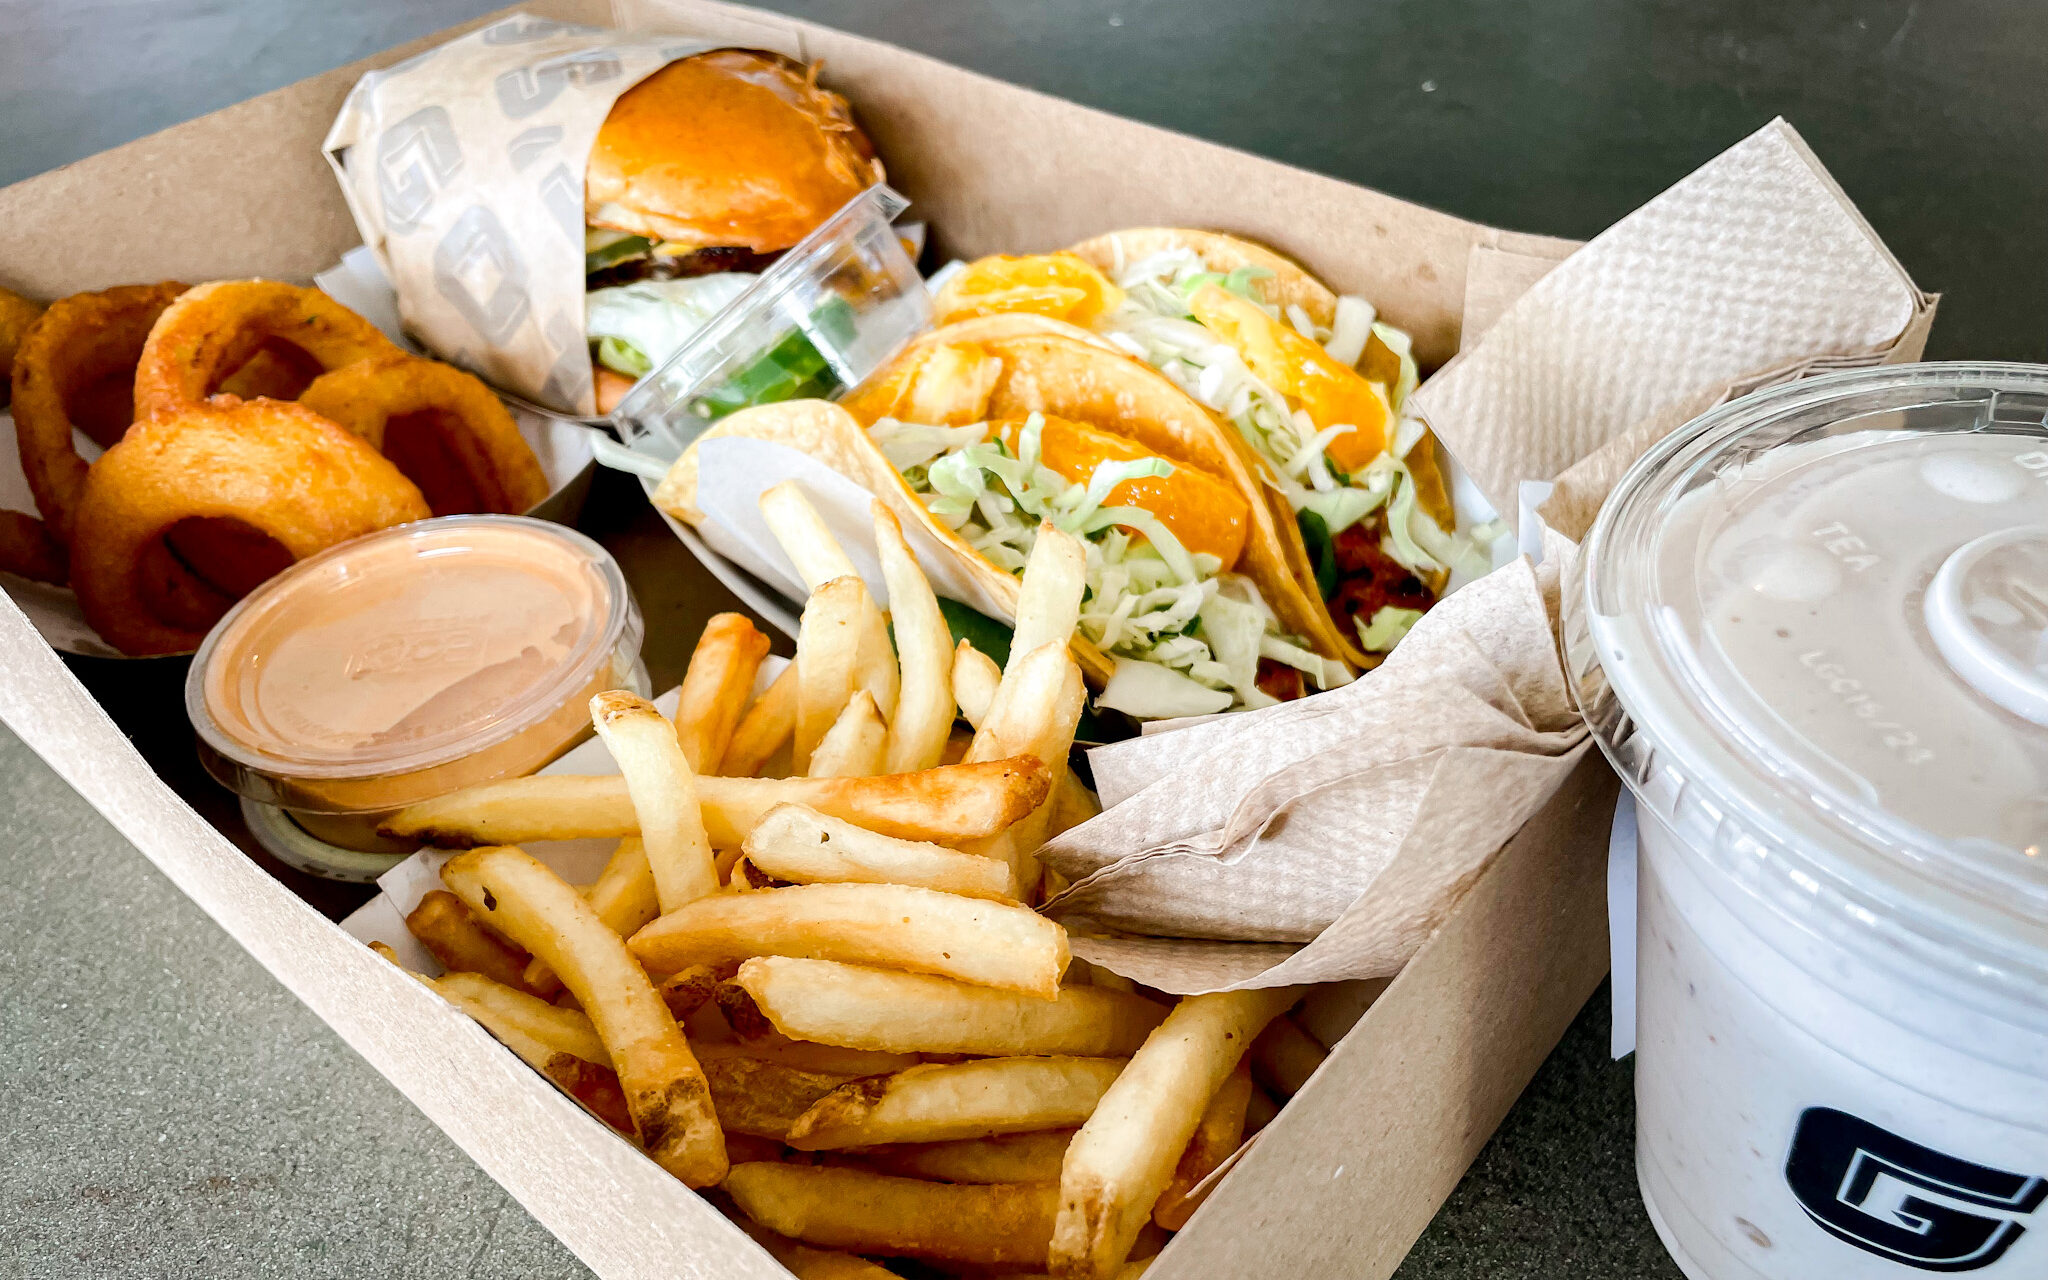 Burger, tacos, fries and onion rings from Gott's Roadside Napa